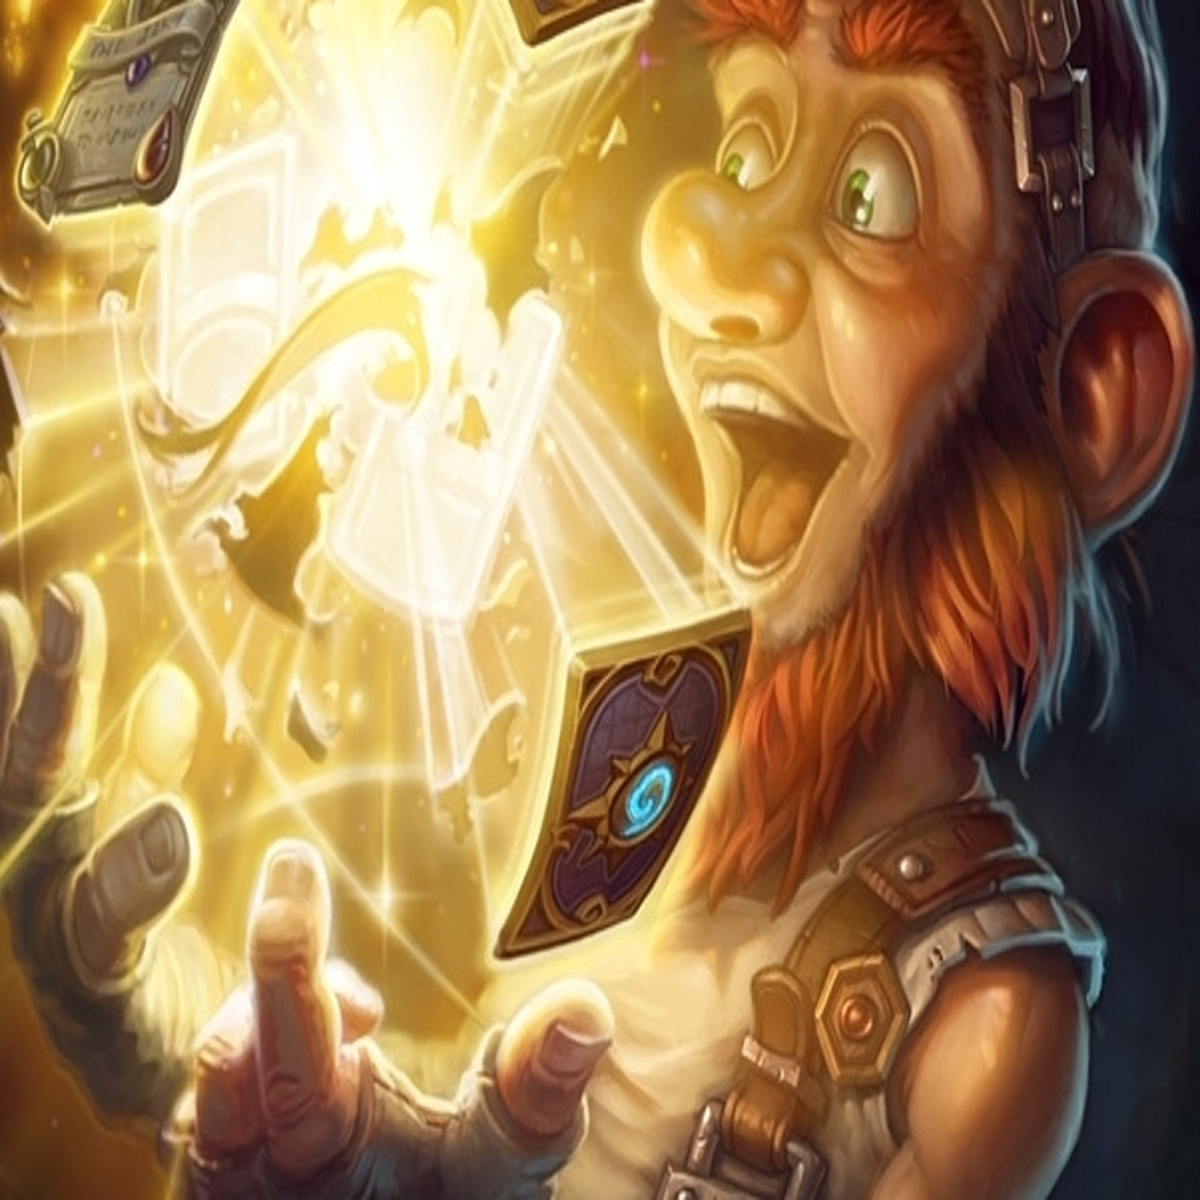 Blizzard Shocks Hearthstone Fans: Hearthstone Classic Replaced by